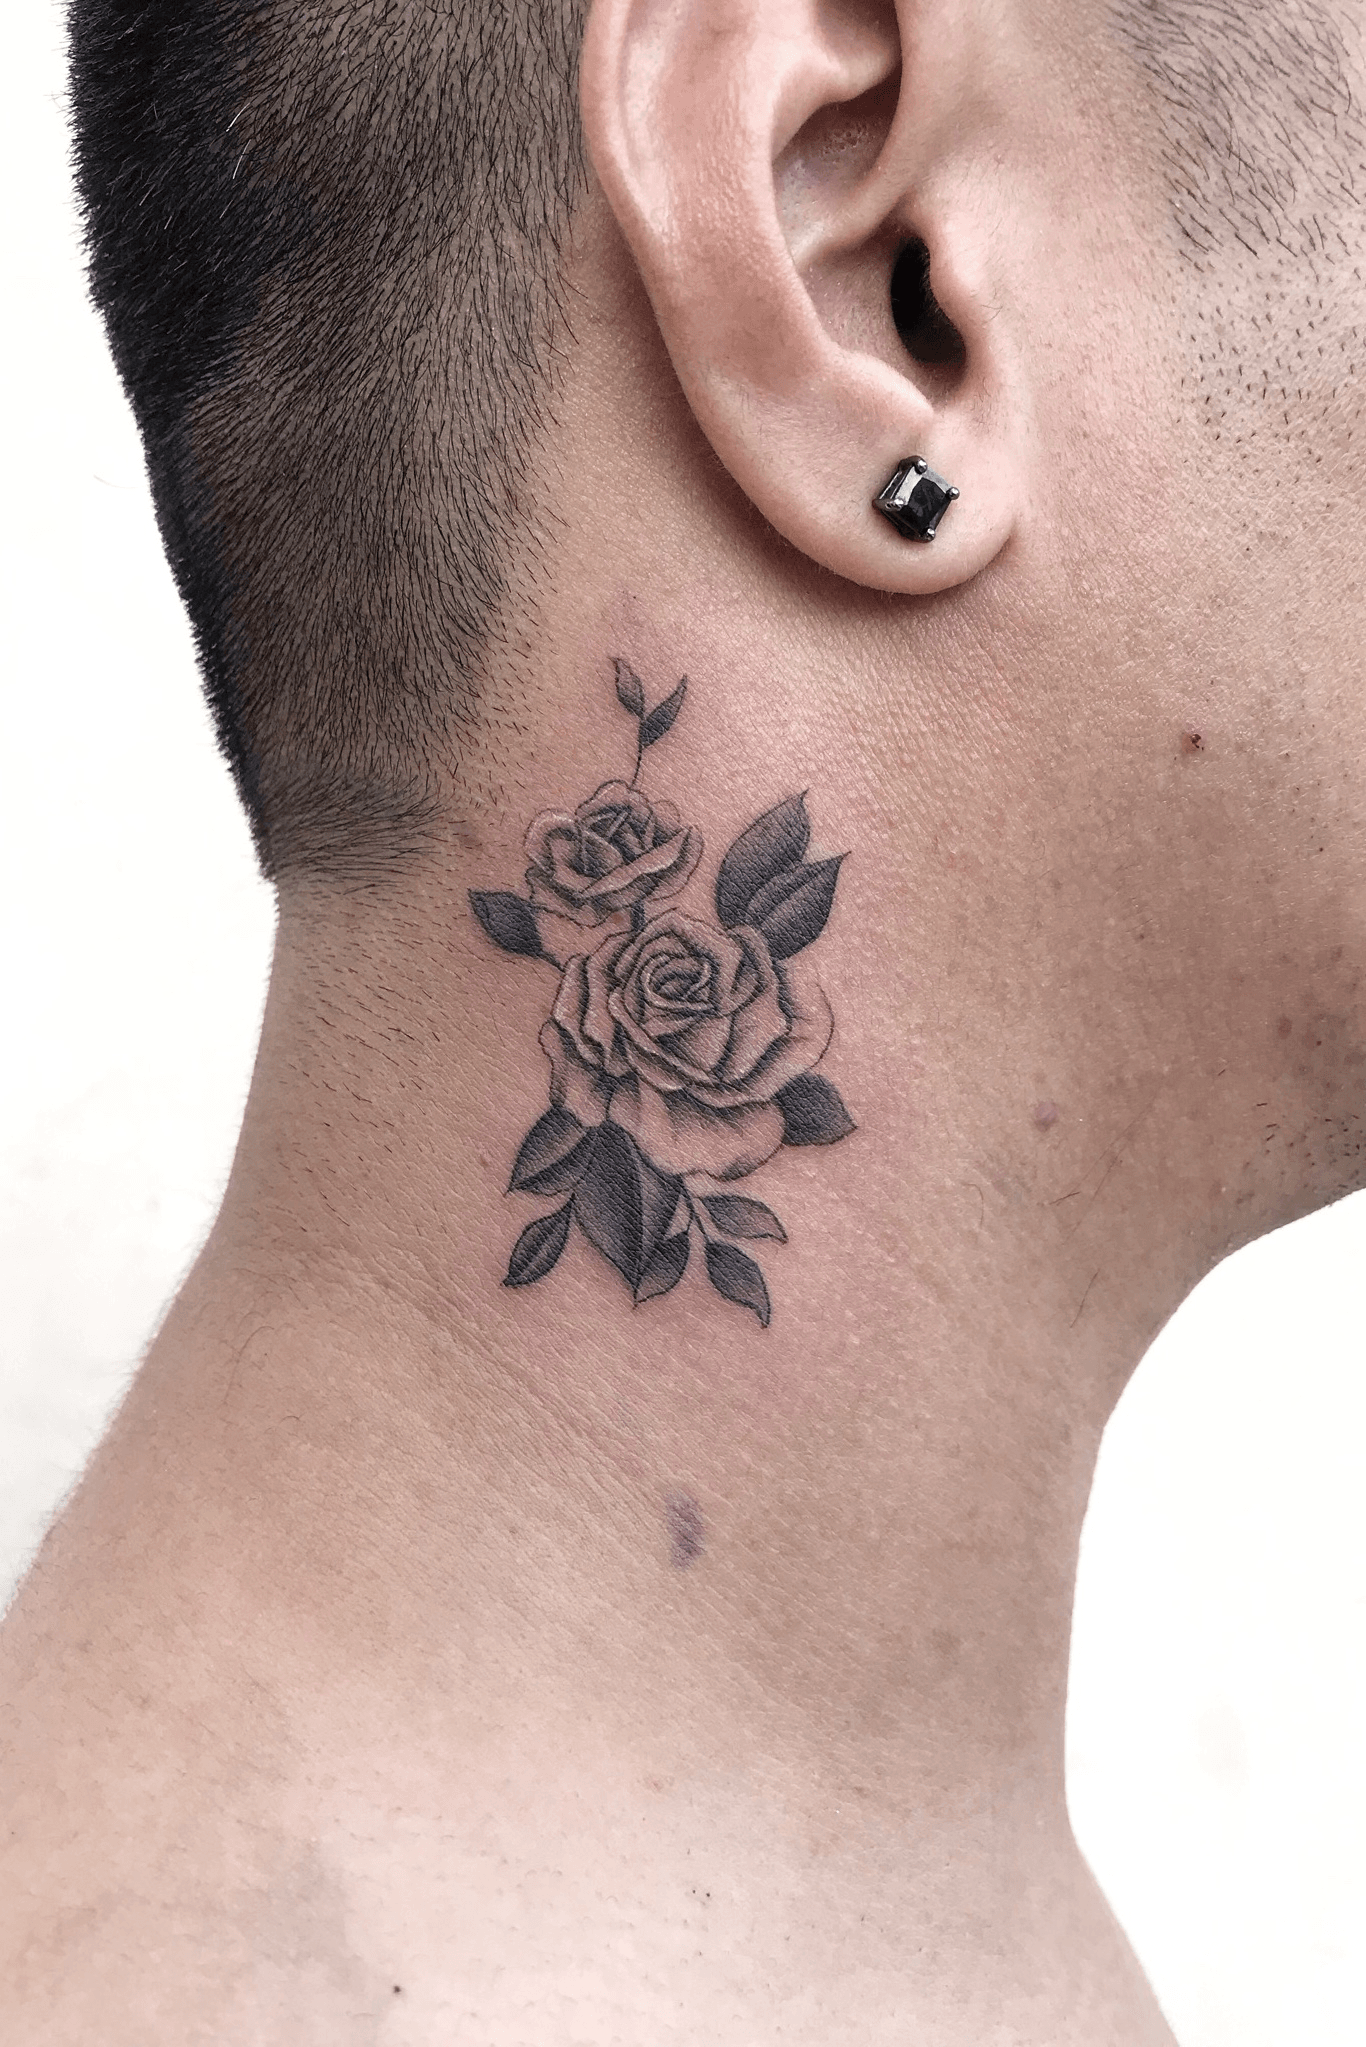 90 Realistic Rose Tattoo Designs For Men  Floral Ink Ideas  Rose neck  tattoo Realistic rose tattoo Neck tattoo